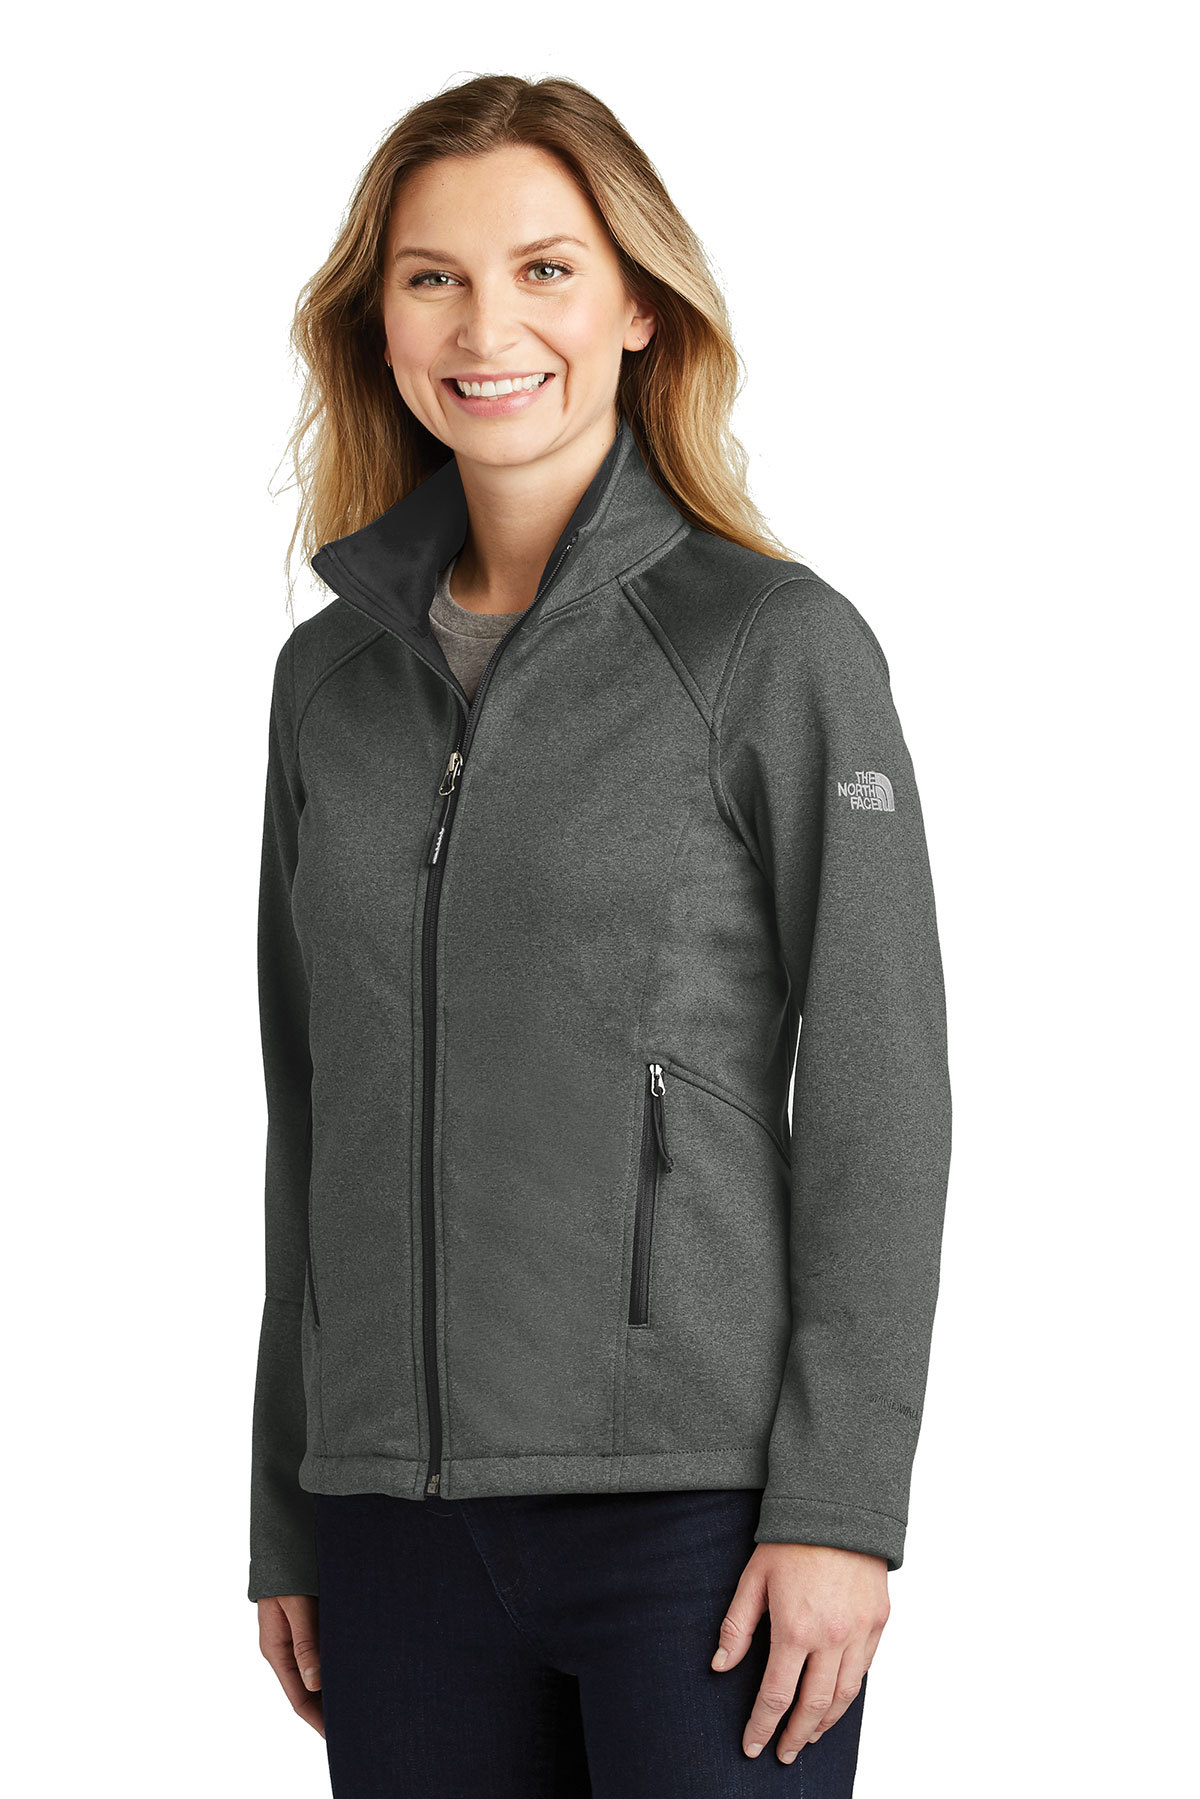 The North Face ® Ladies Ridgewall Soft Shell Jacket | Product | Company ...